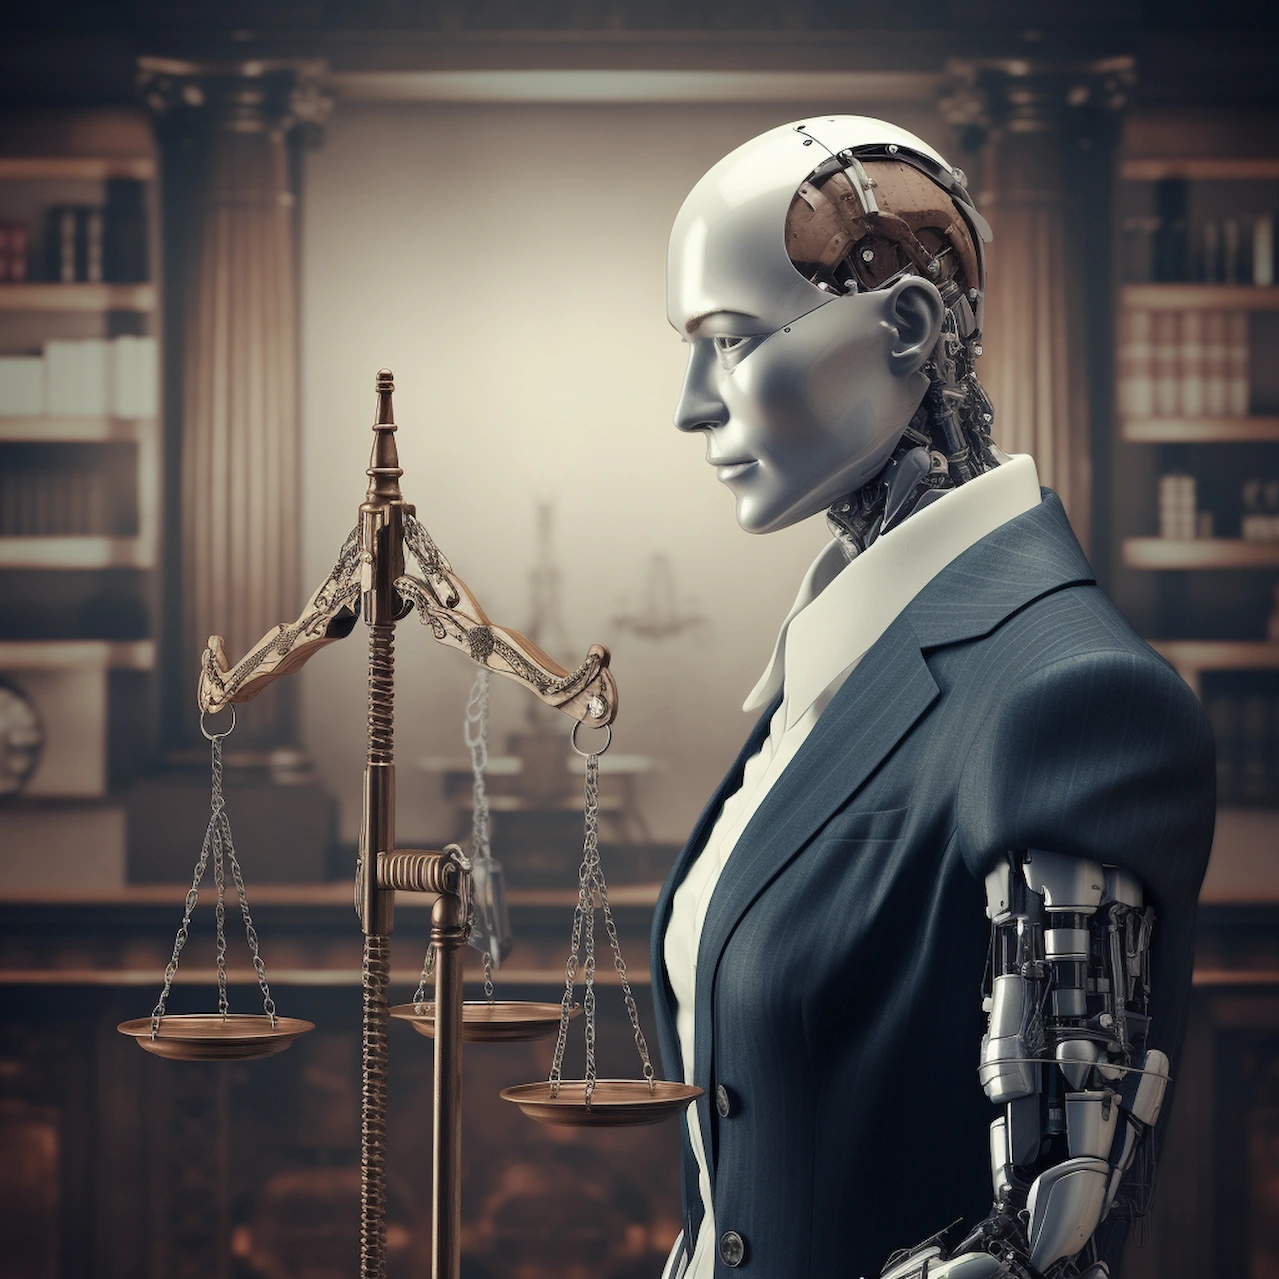 Ai In Law is and the future for self represented litigants